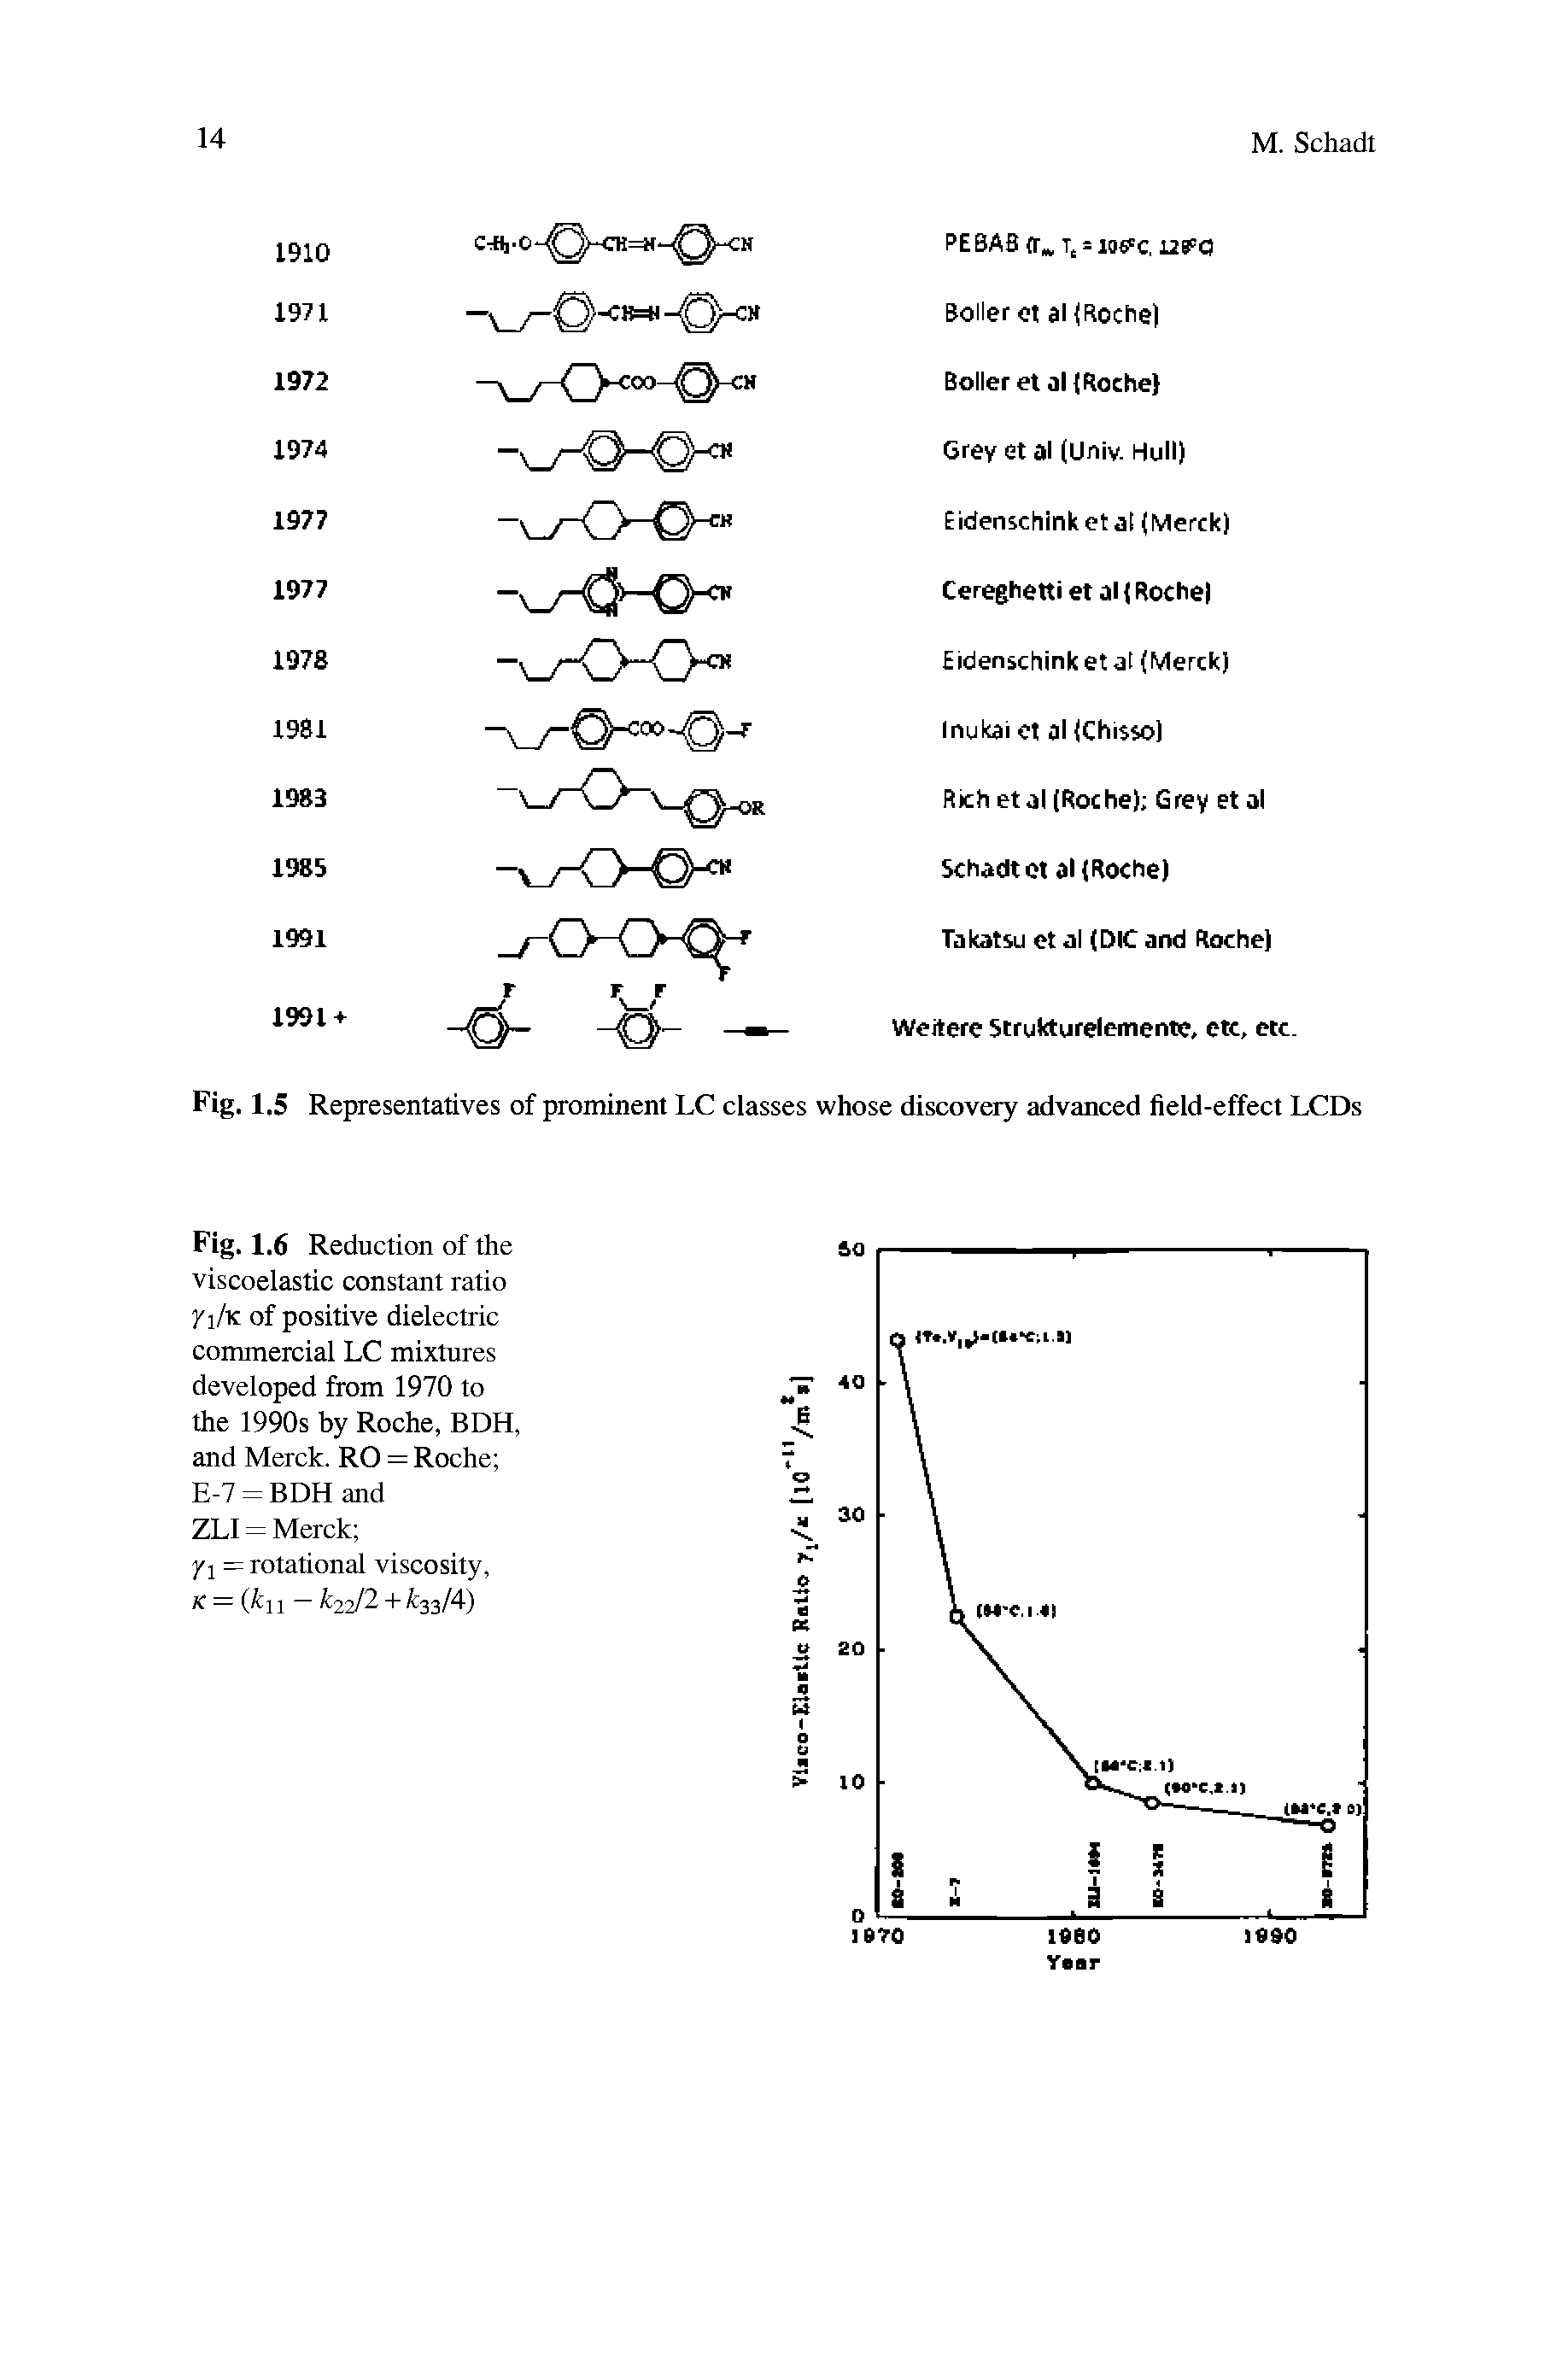 Fig. 1.6 Reduction of the viscoelastic constant ratio Xi/k of positive dielectric commercial LC mixtures developed from 1970 to the 1990s by Roche, BDH, and Merck. RO = Roche E-7 = BDH and ZLI = Merck yi = rotational viscosity,...